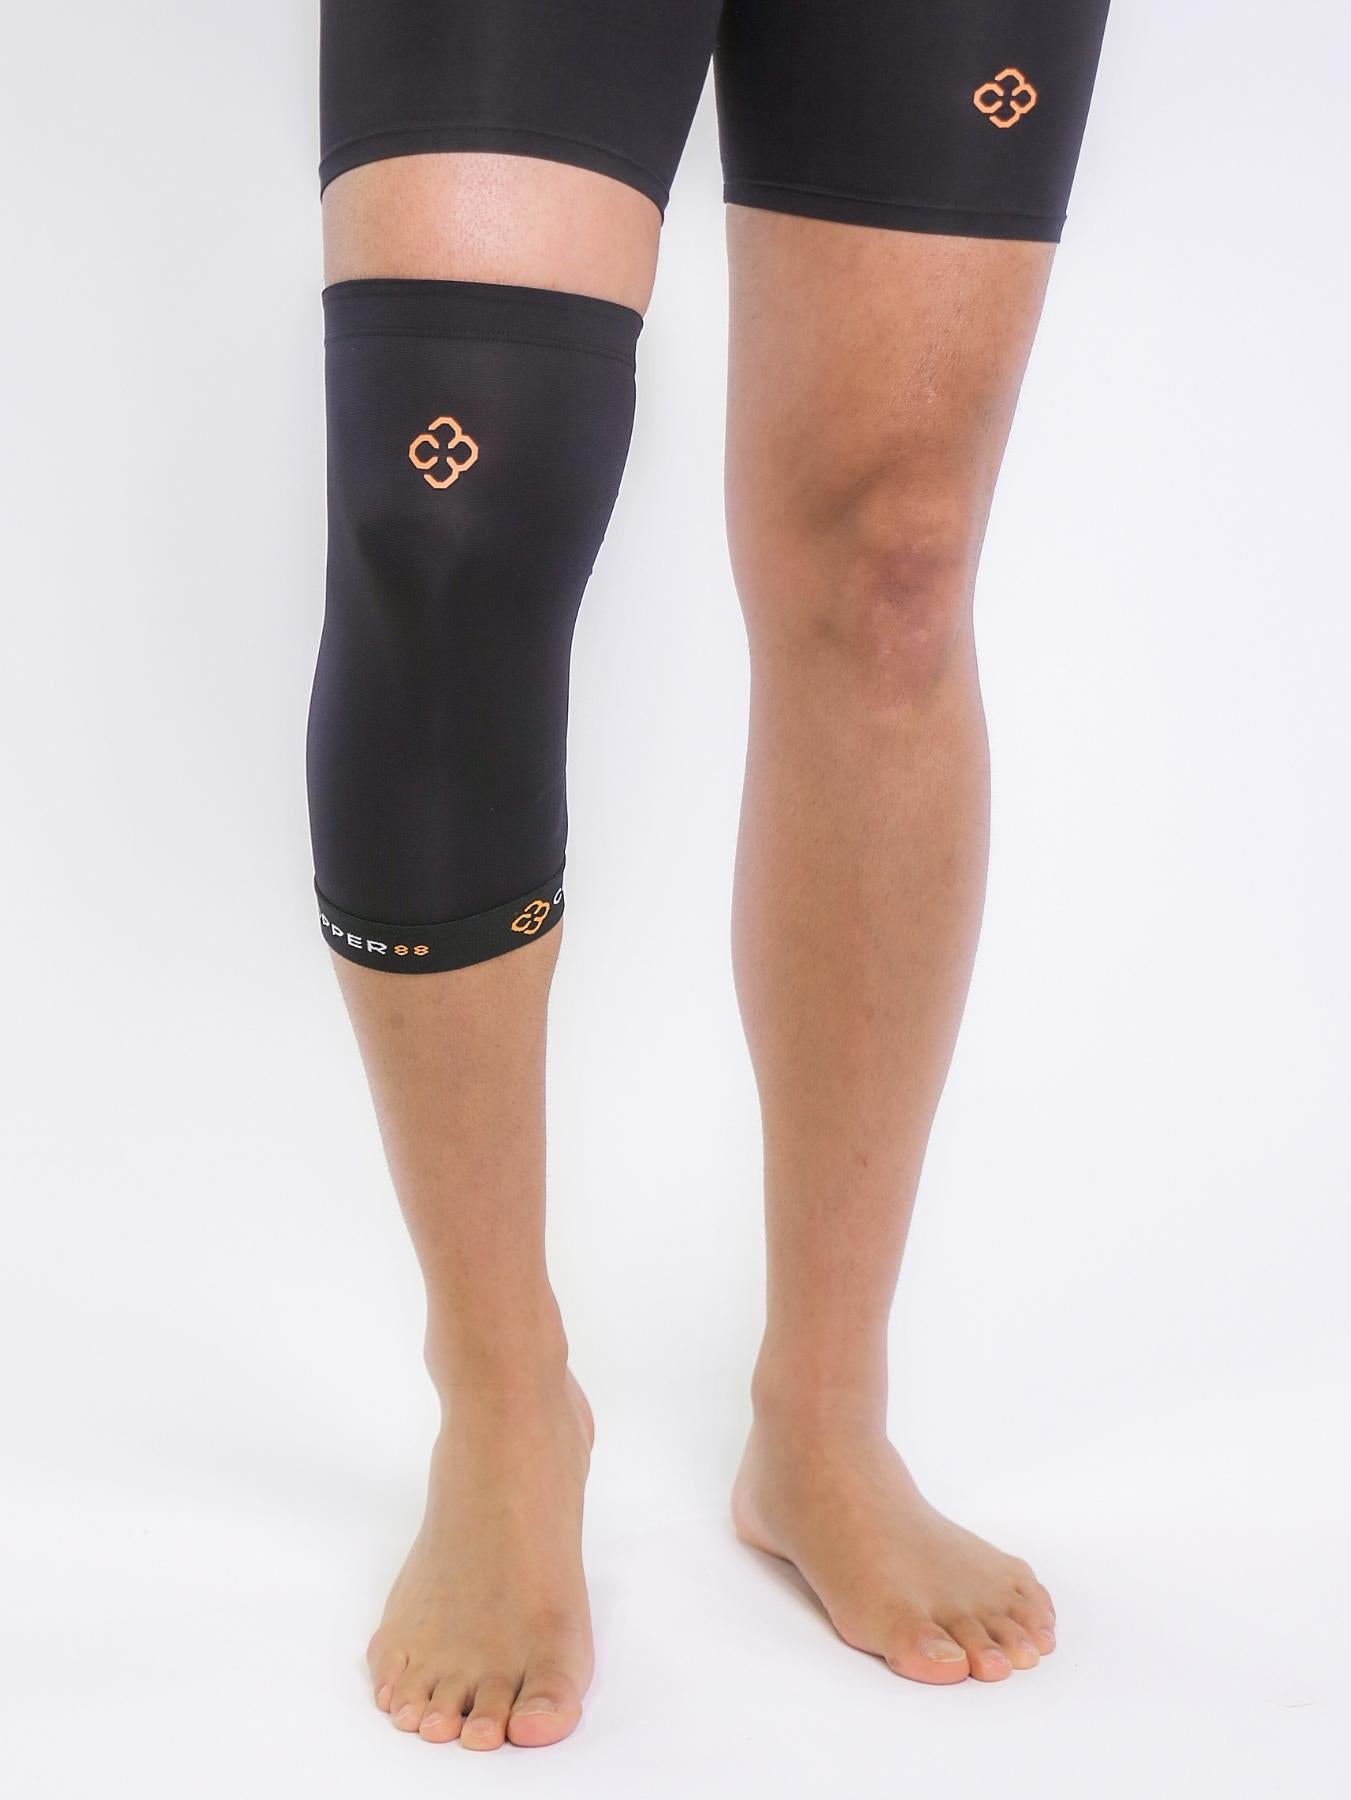 Copper Compression Knee Sleeve - Unisex – Copper 88